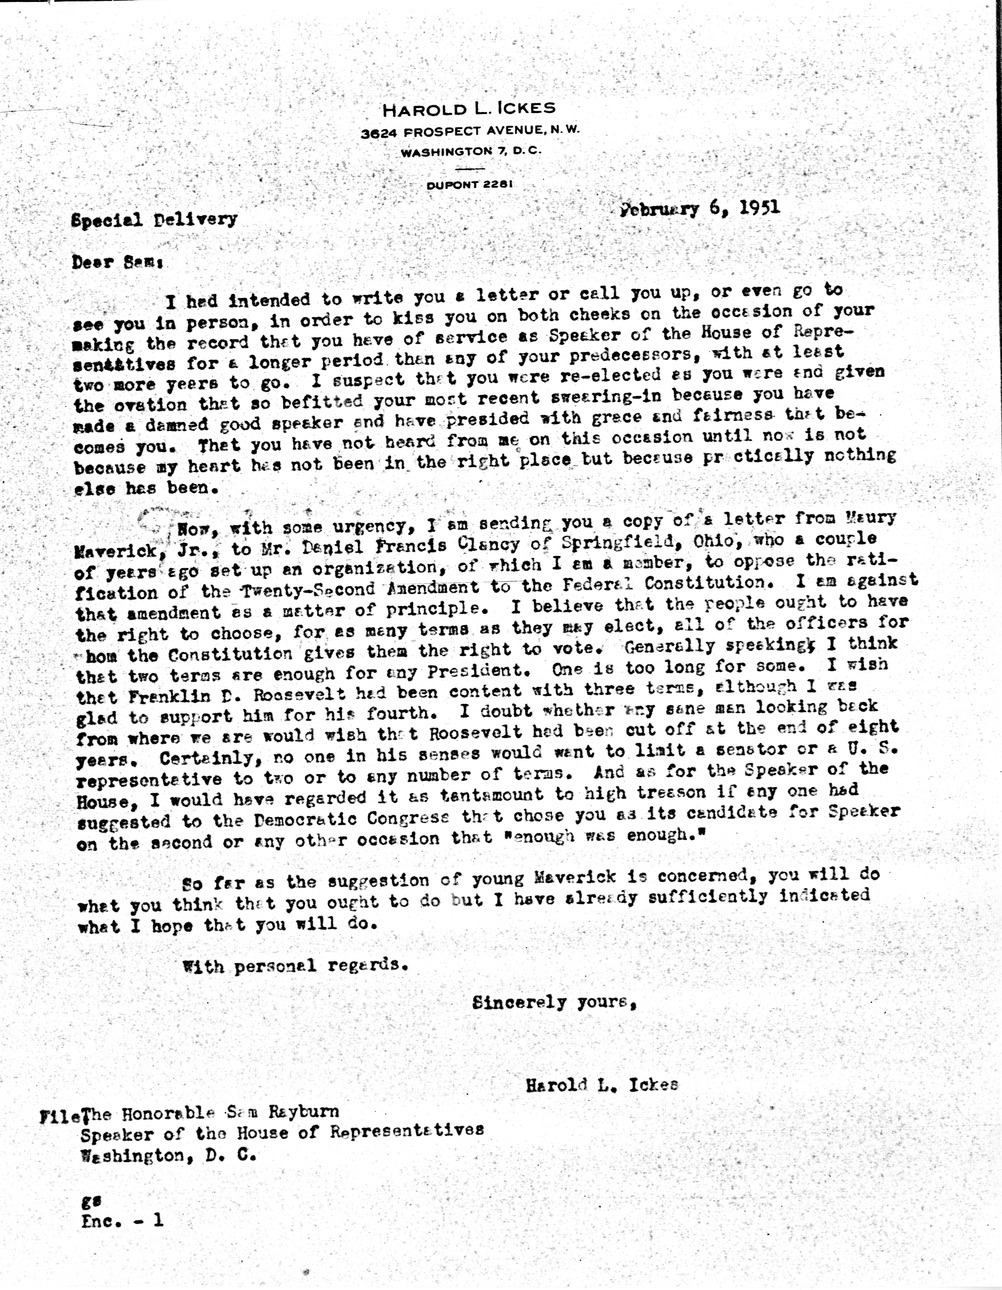 Letter from Harold Ickes to Daniel F. Clancy, with Attachment